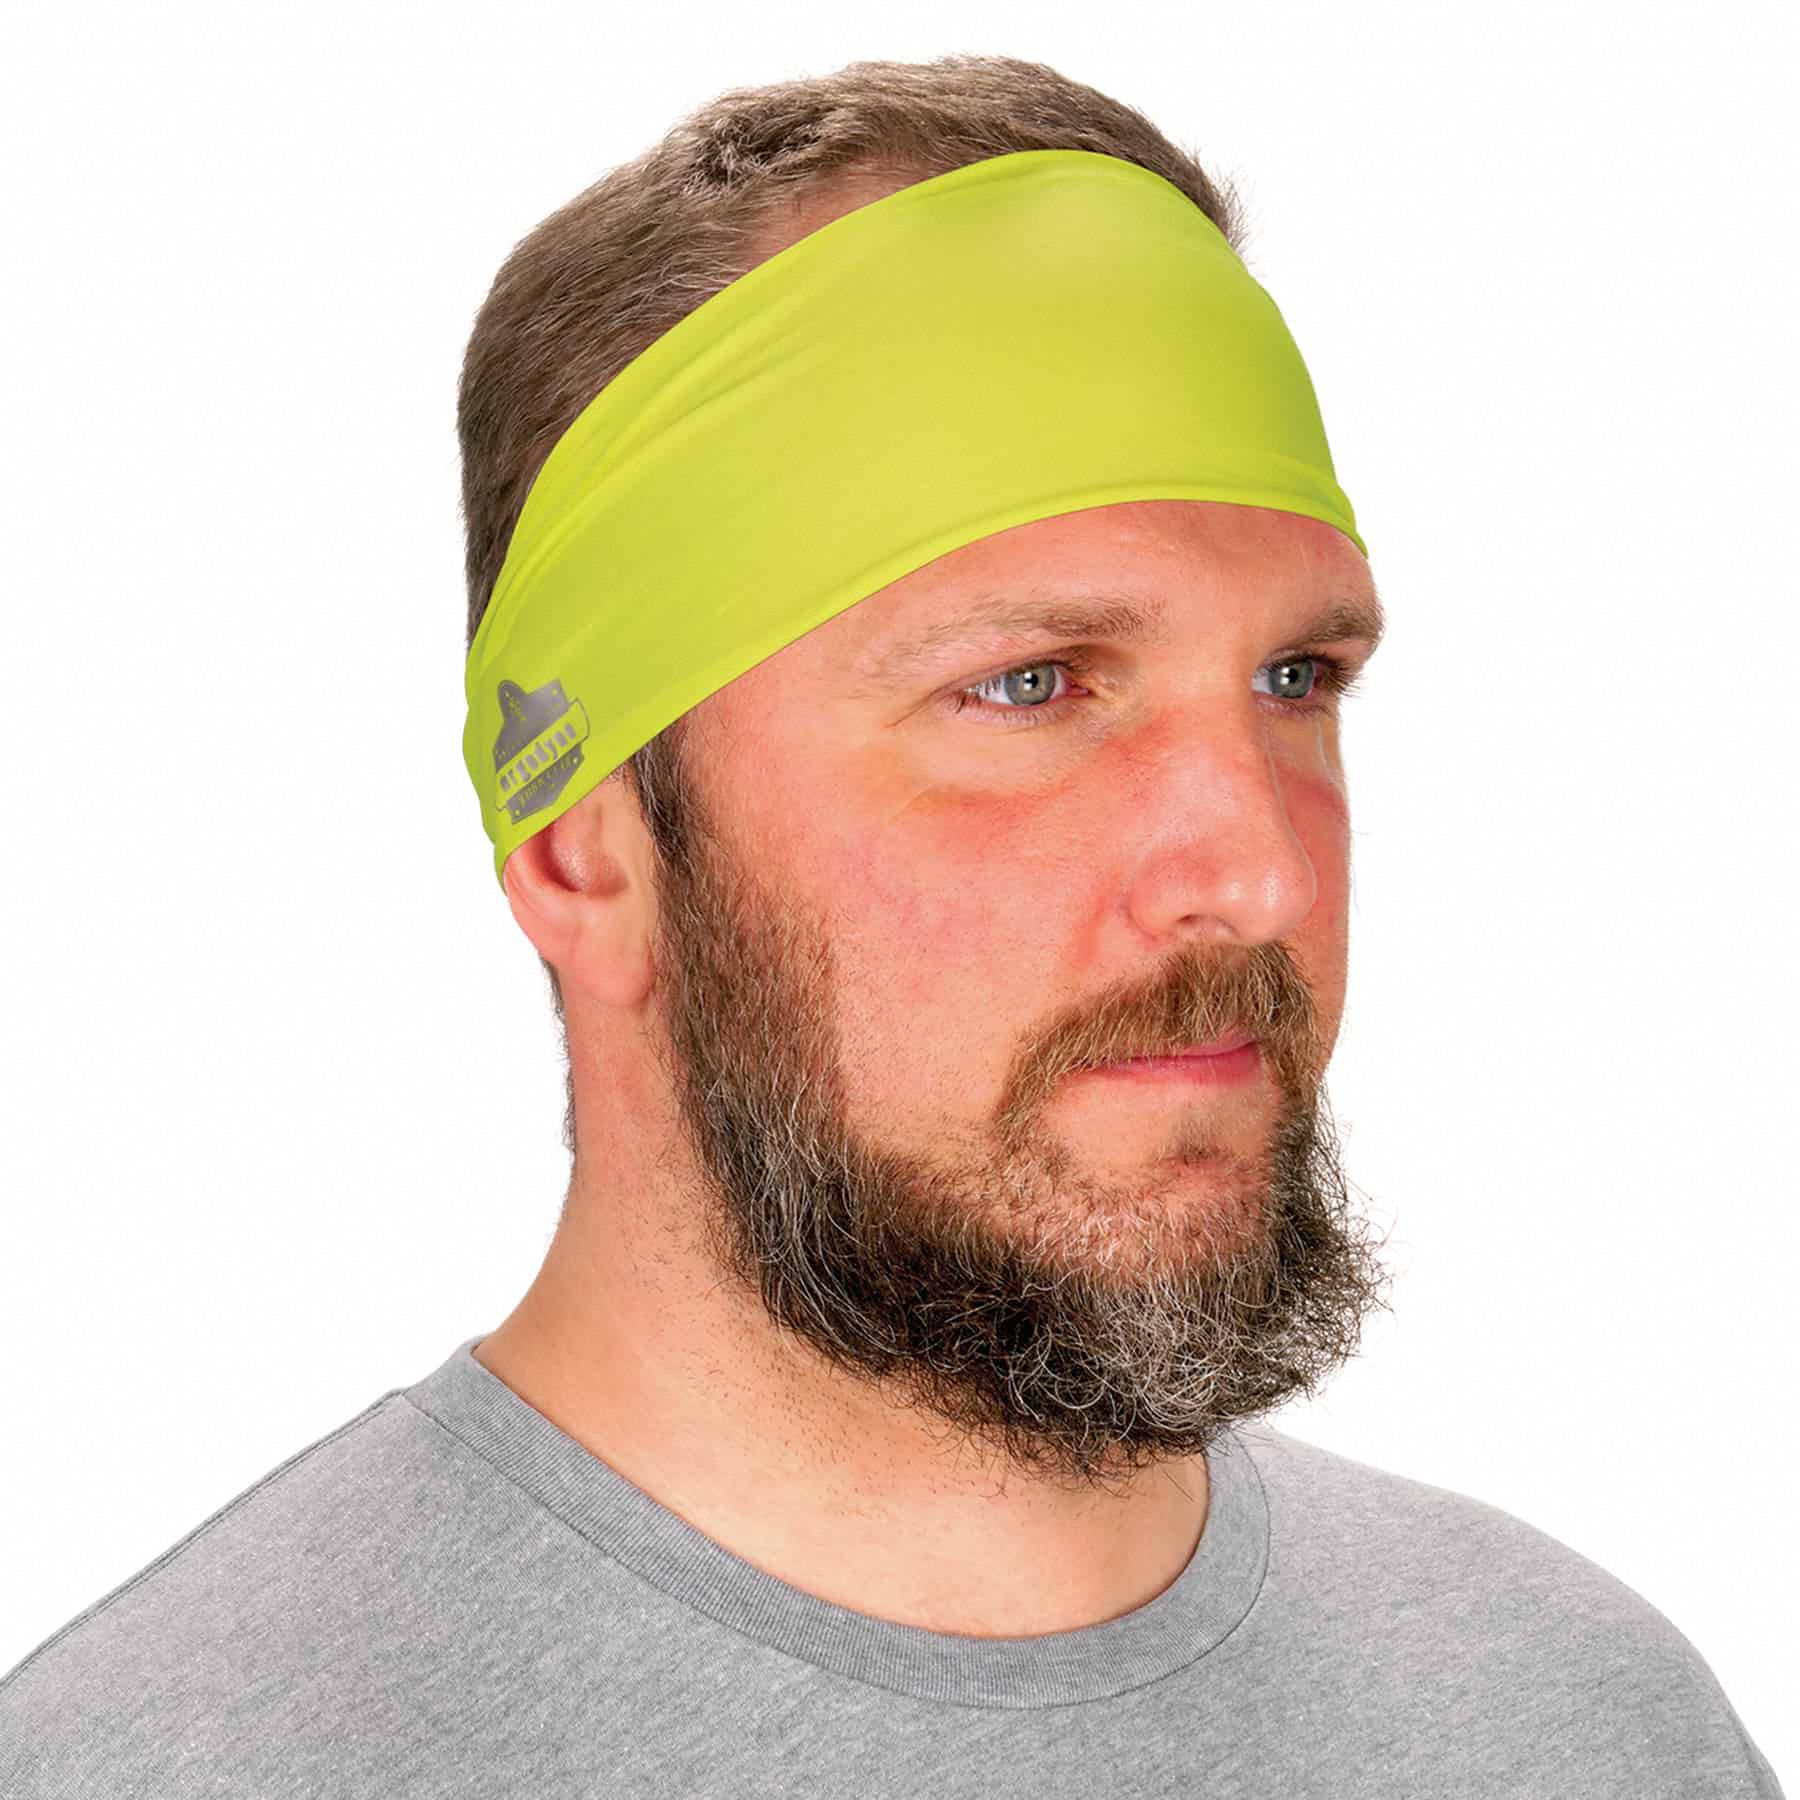 CHILL-ITS BY ERGODYNE, Lime, One Size Fits All, Cooling headband ...